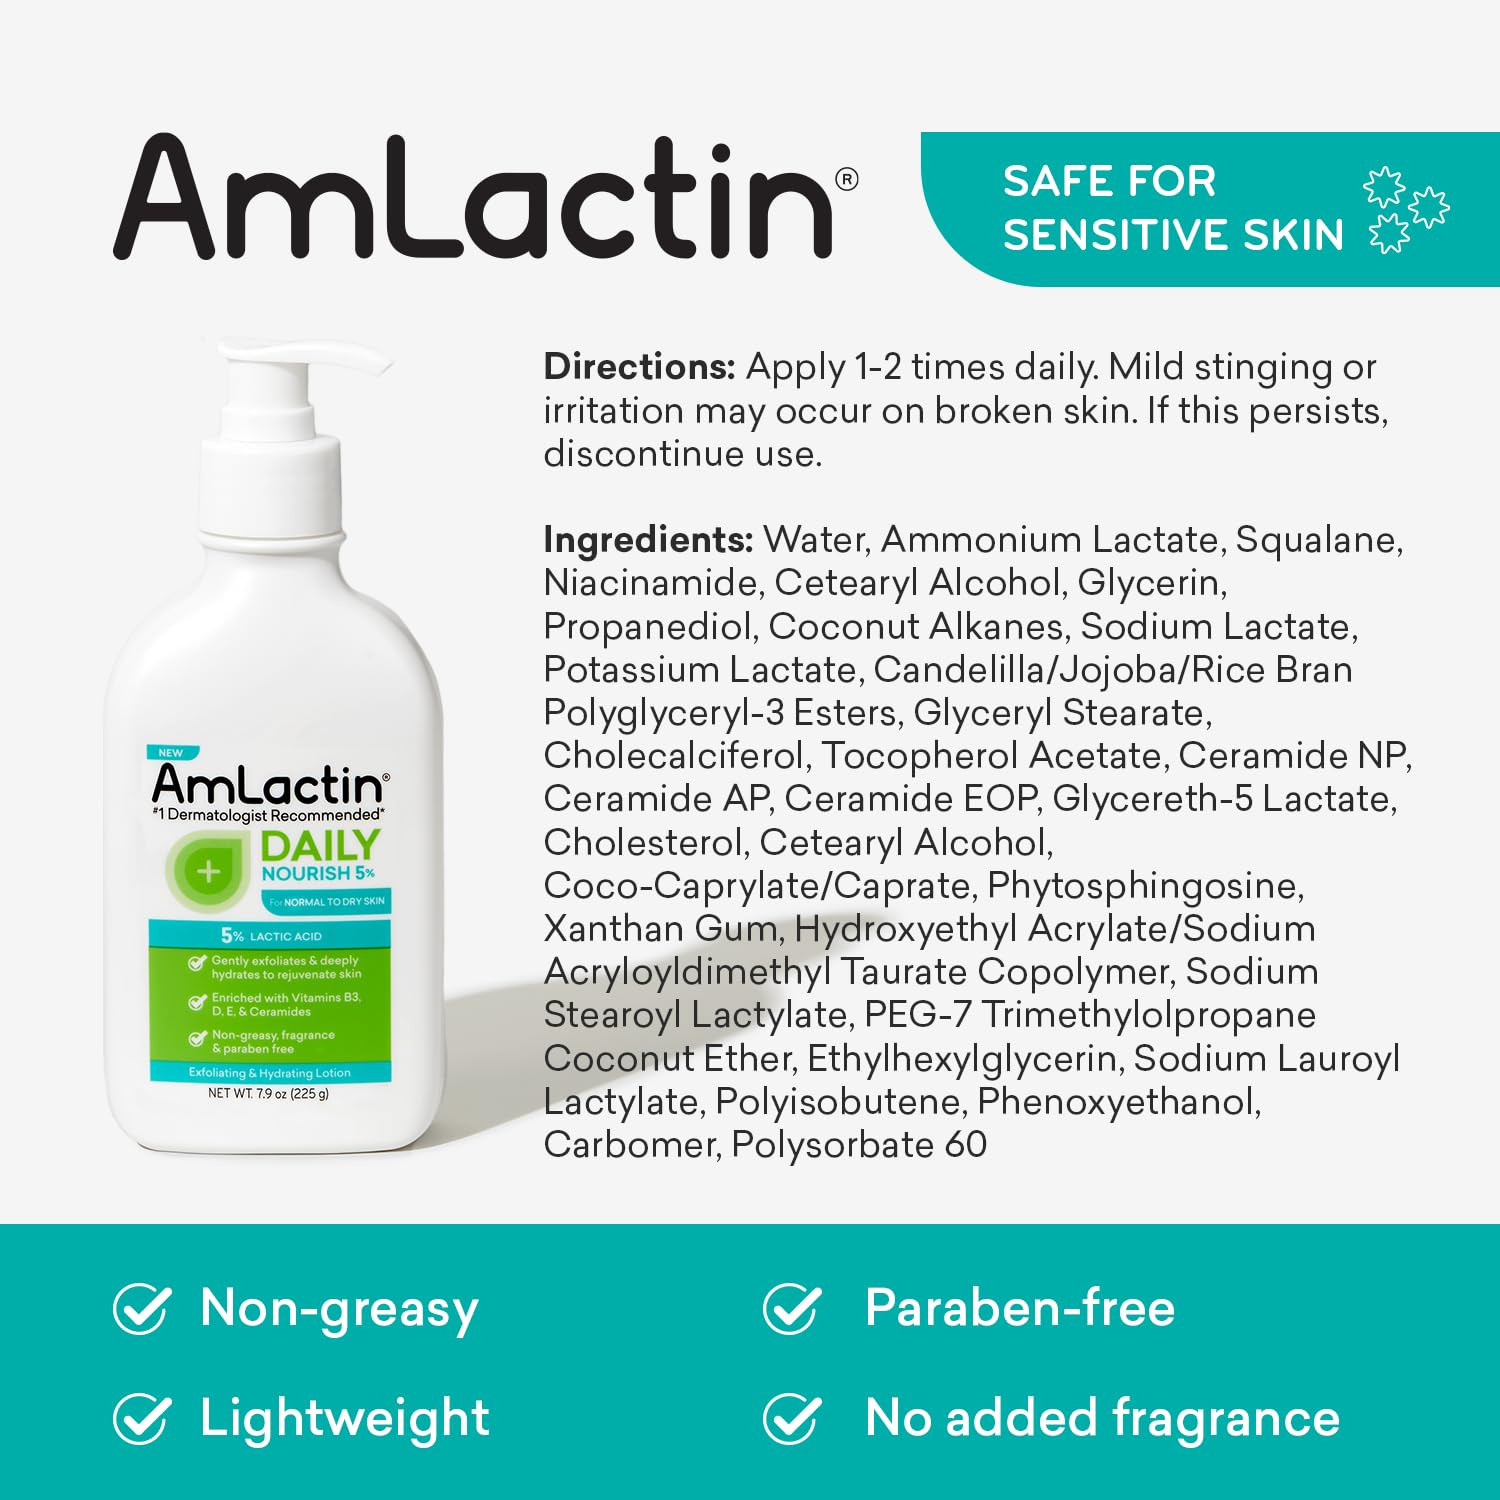 AmLactin Daily Nourish 5% - 7.9 oz Body Lotion with 5% Lactic Acid - Exfoliator and Moisturizer for Dry Skin? : Beauty & Personal Care